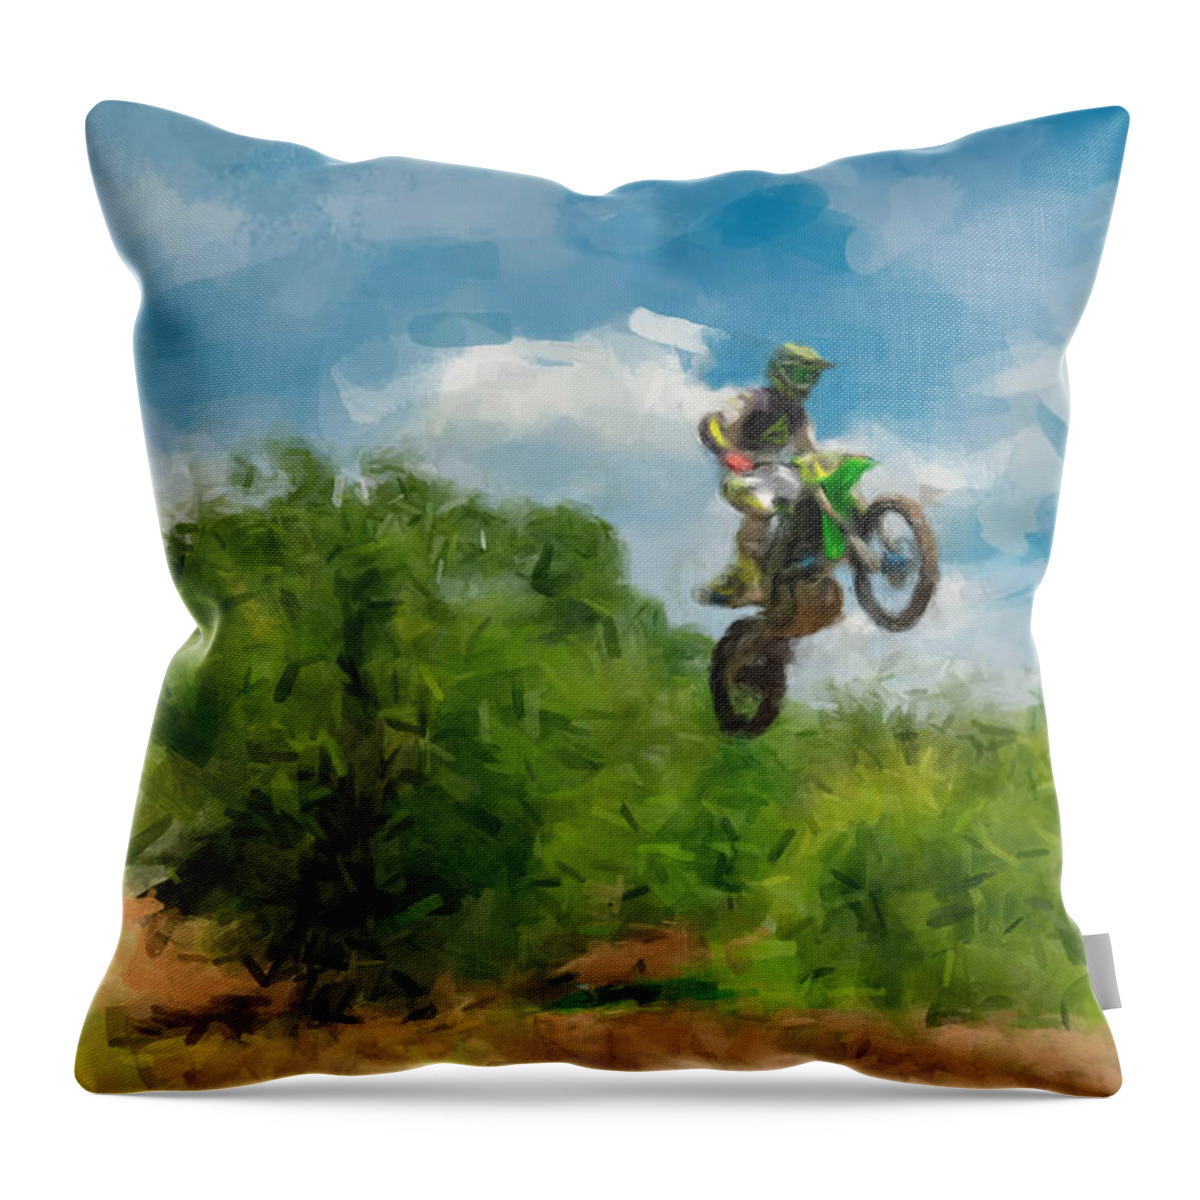 Motocycle Throw Pillow featuring the painting The Jump by Gary Arnold